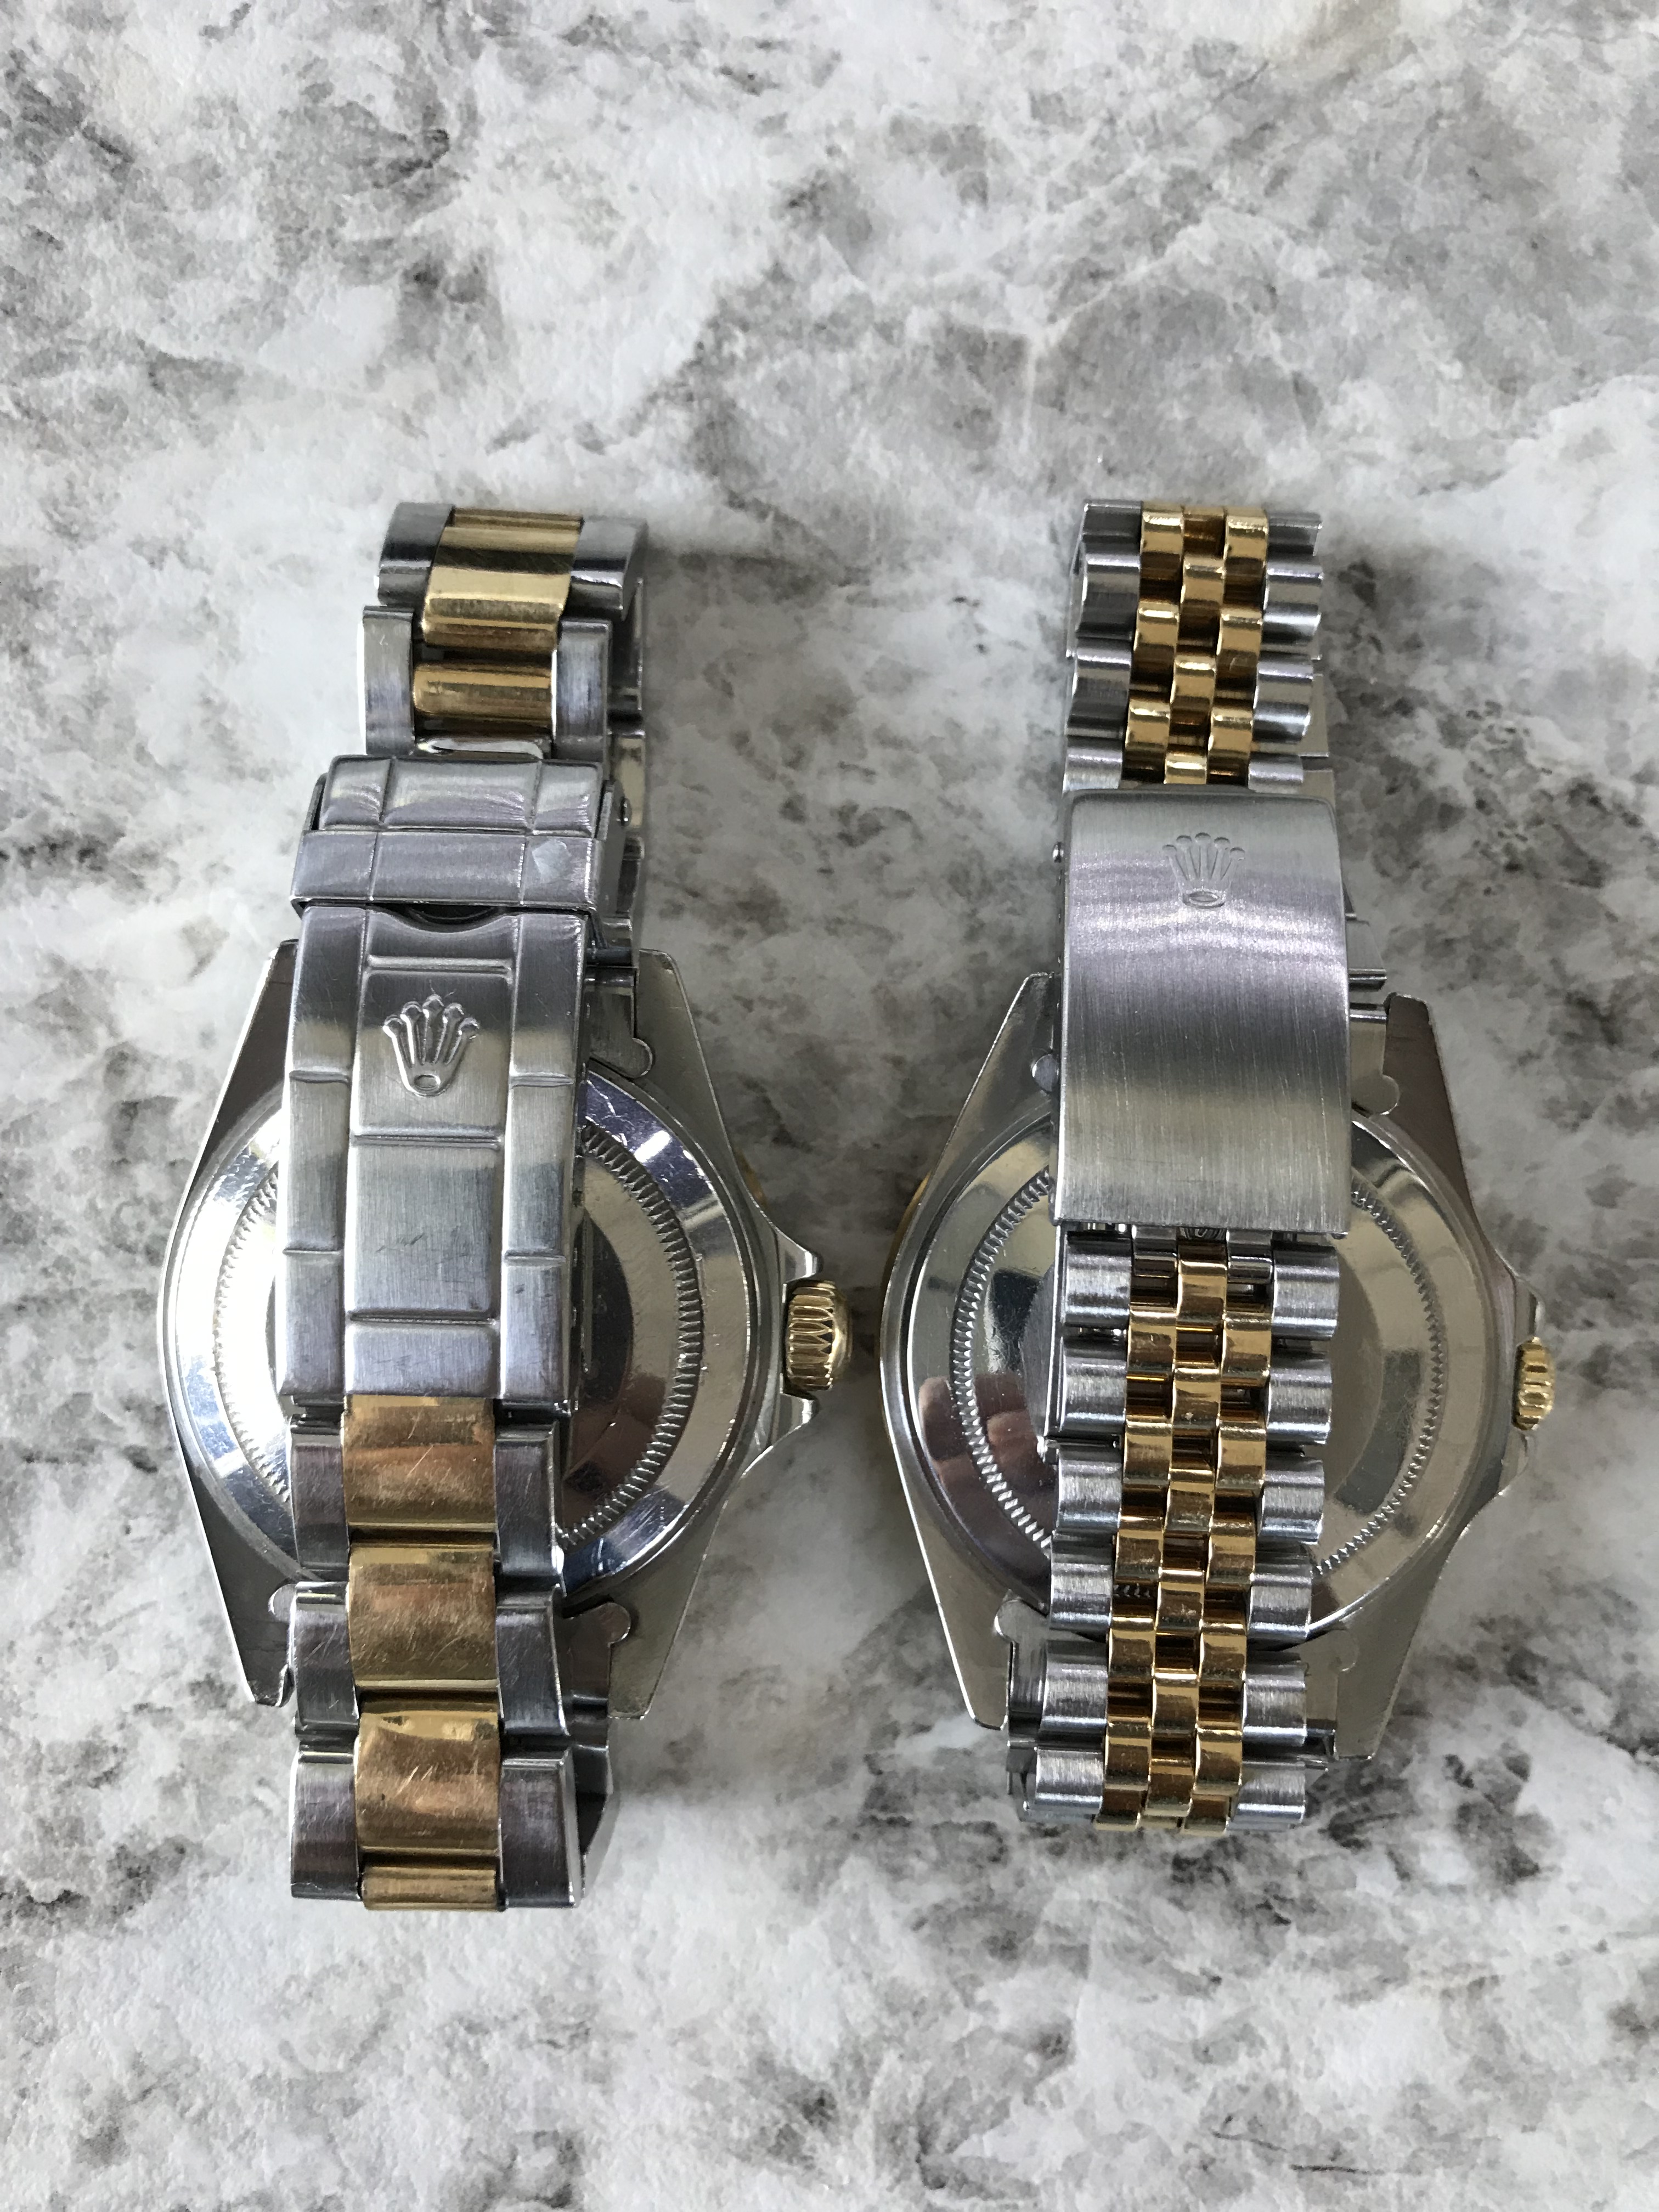 Rolex Two Tone Submariner and Rolex GMT